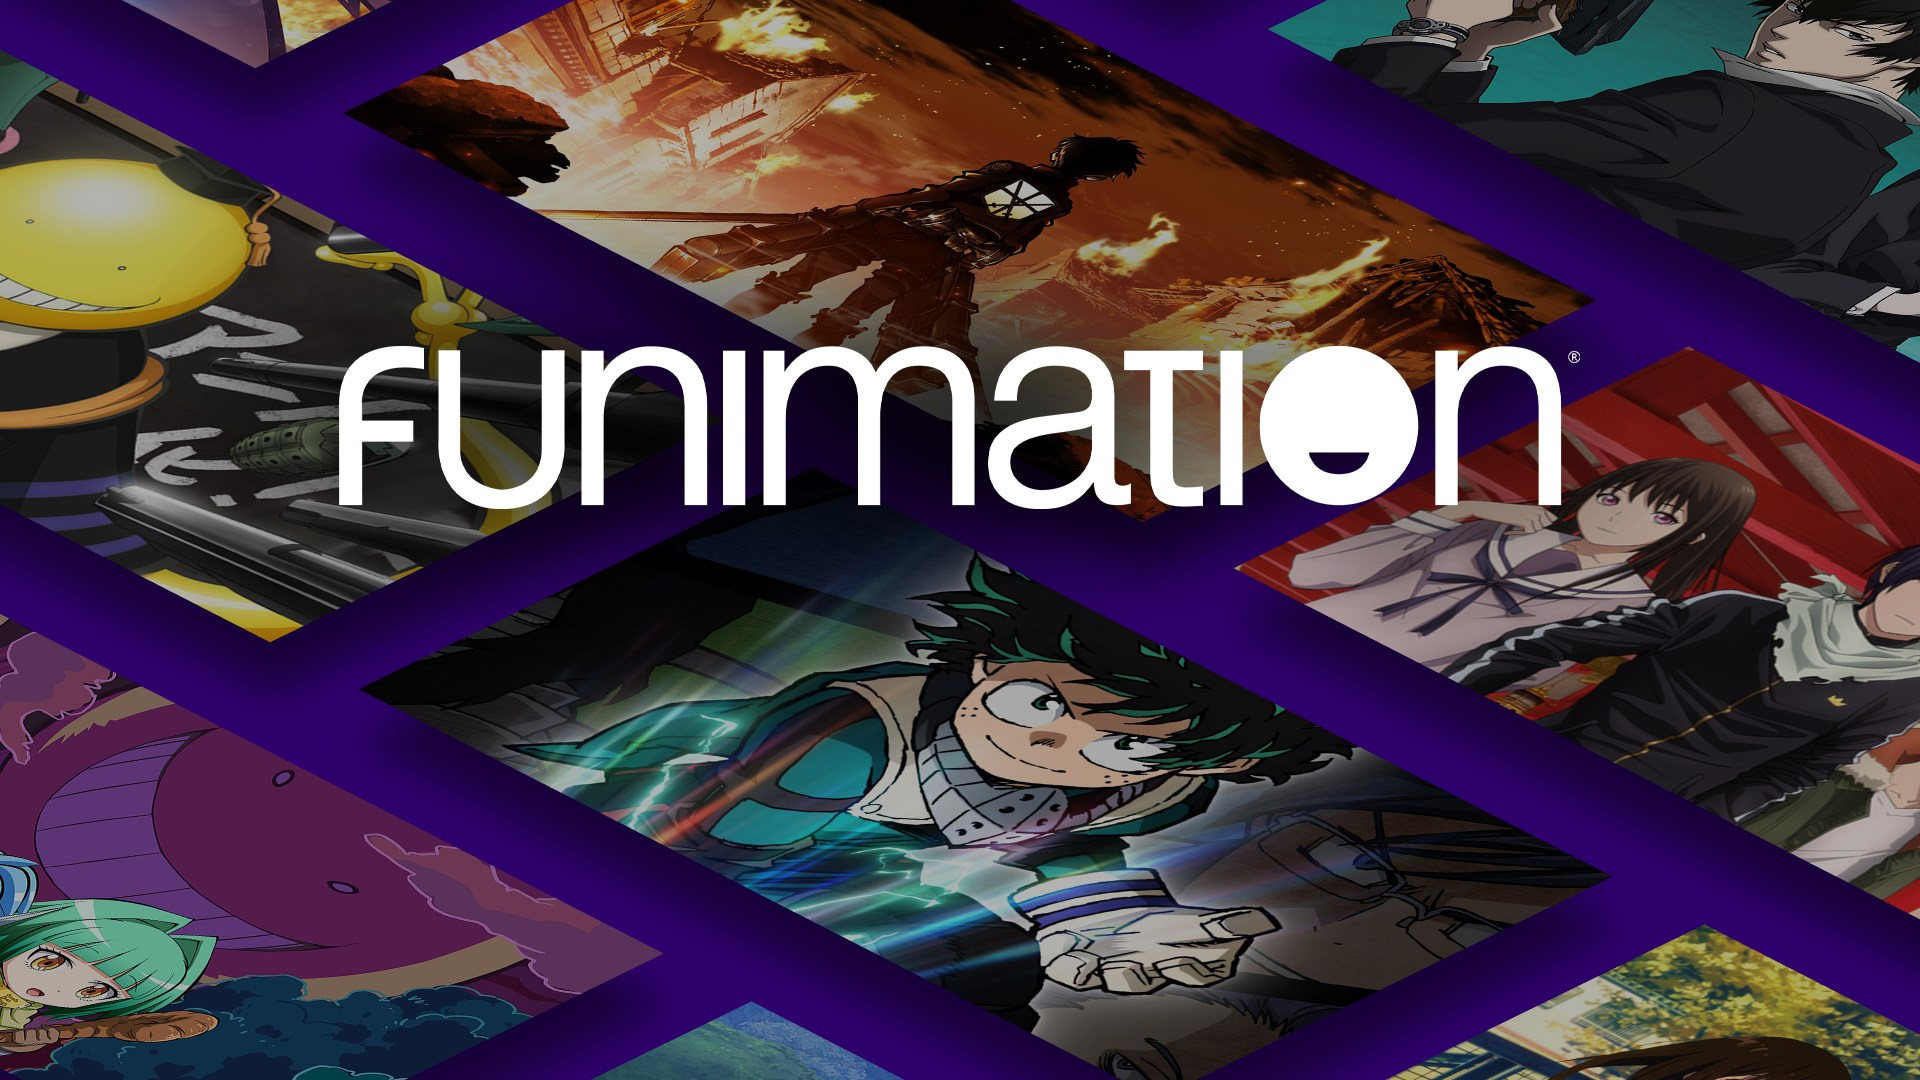 Crunchyroll Adds All Funimation Content, Sony Phasing Out Funimation